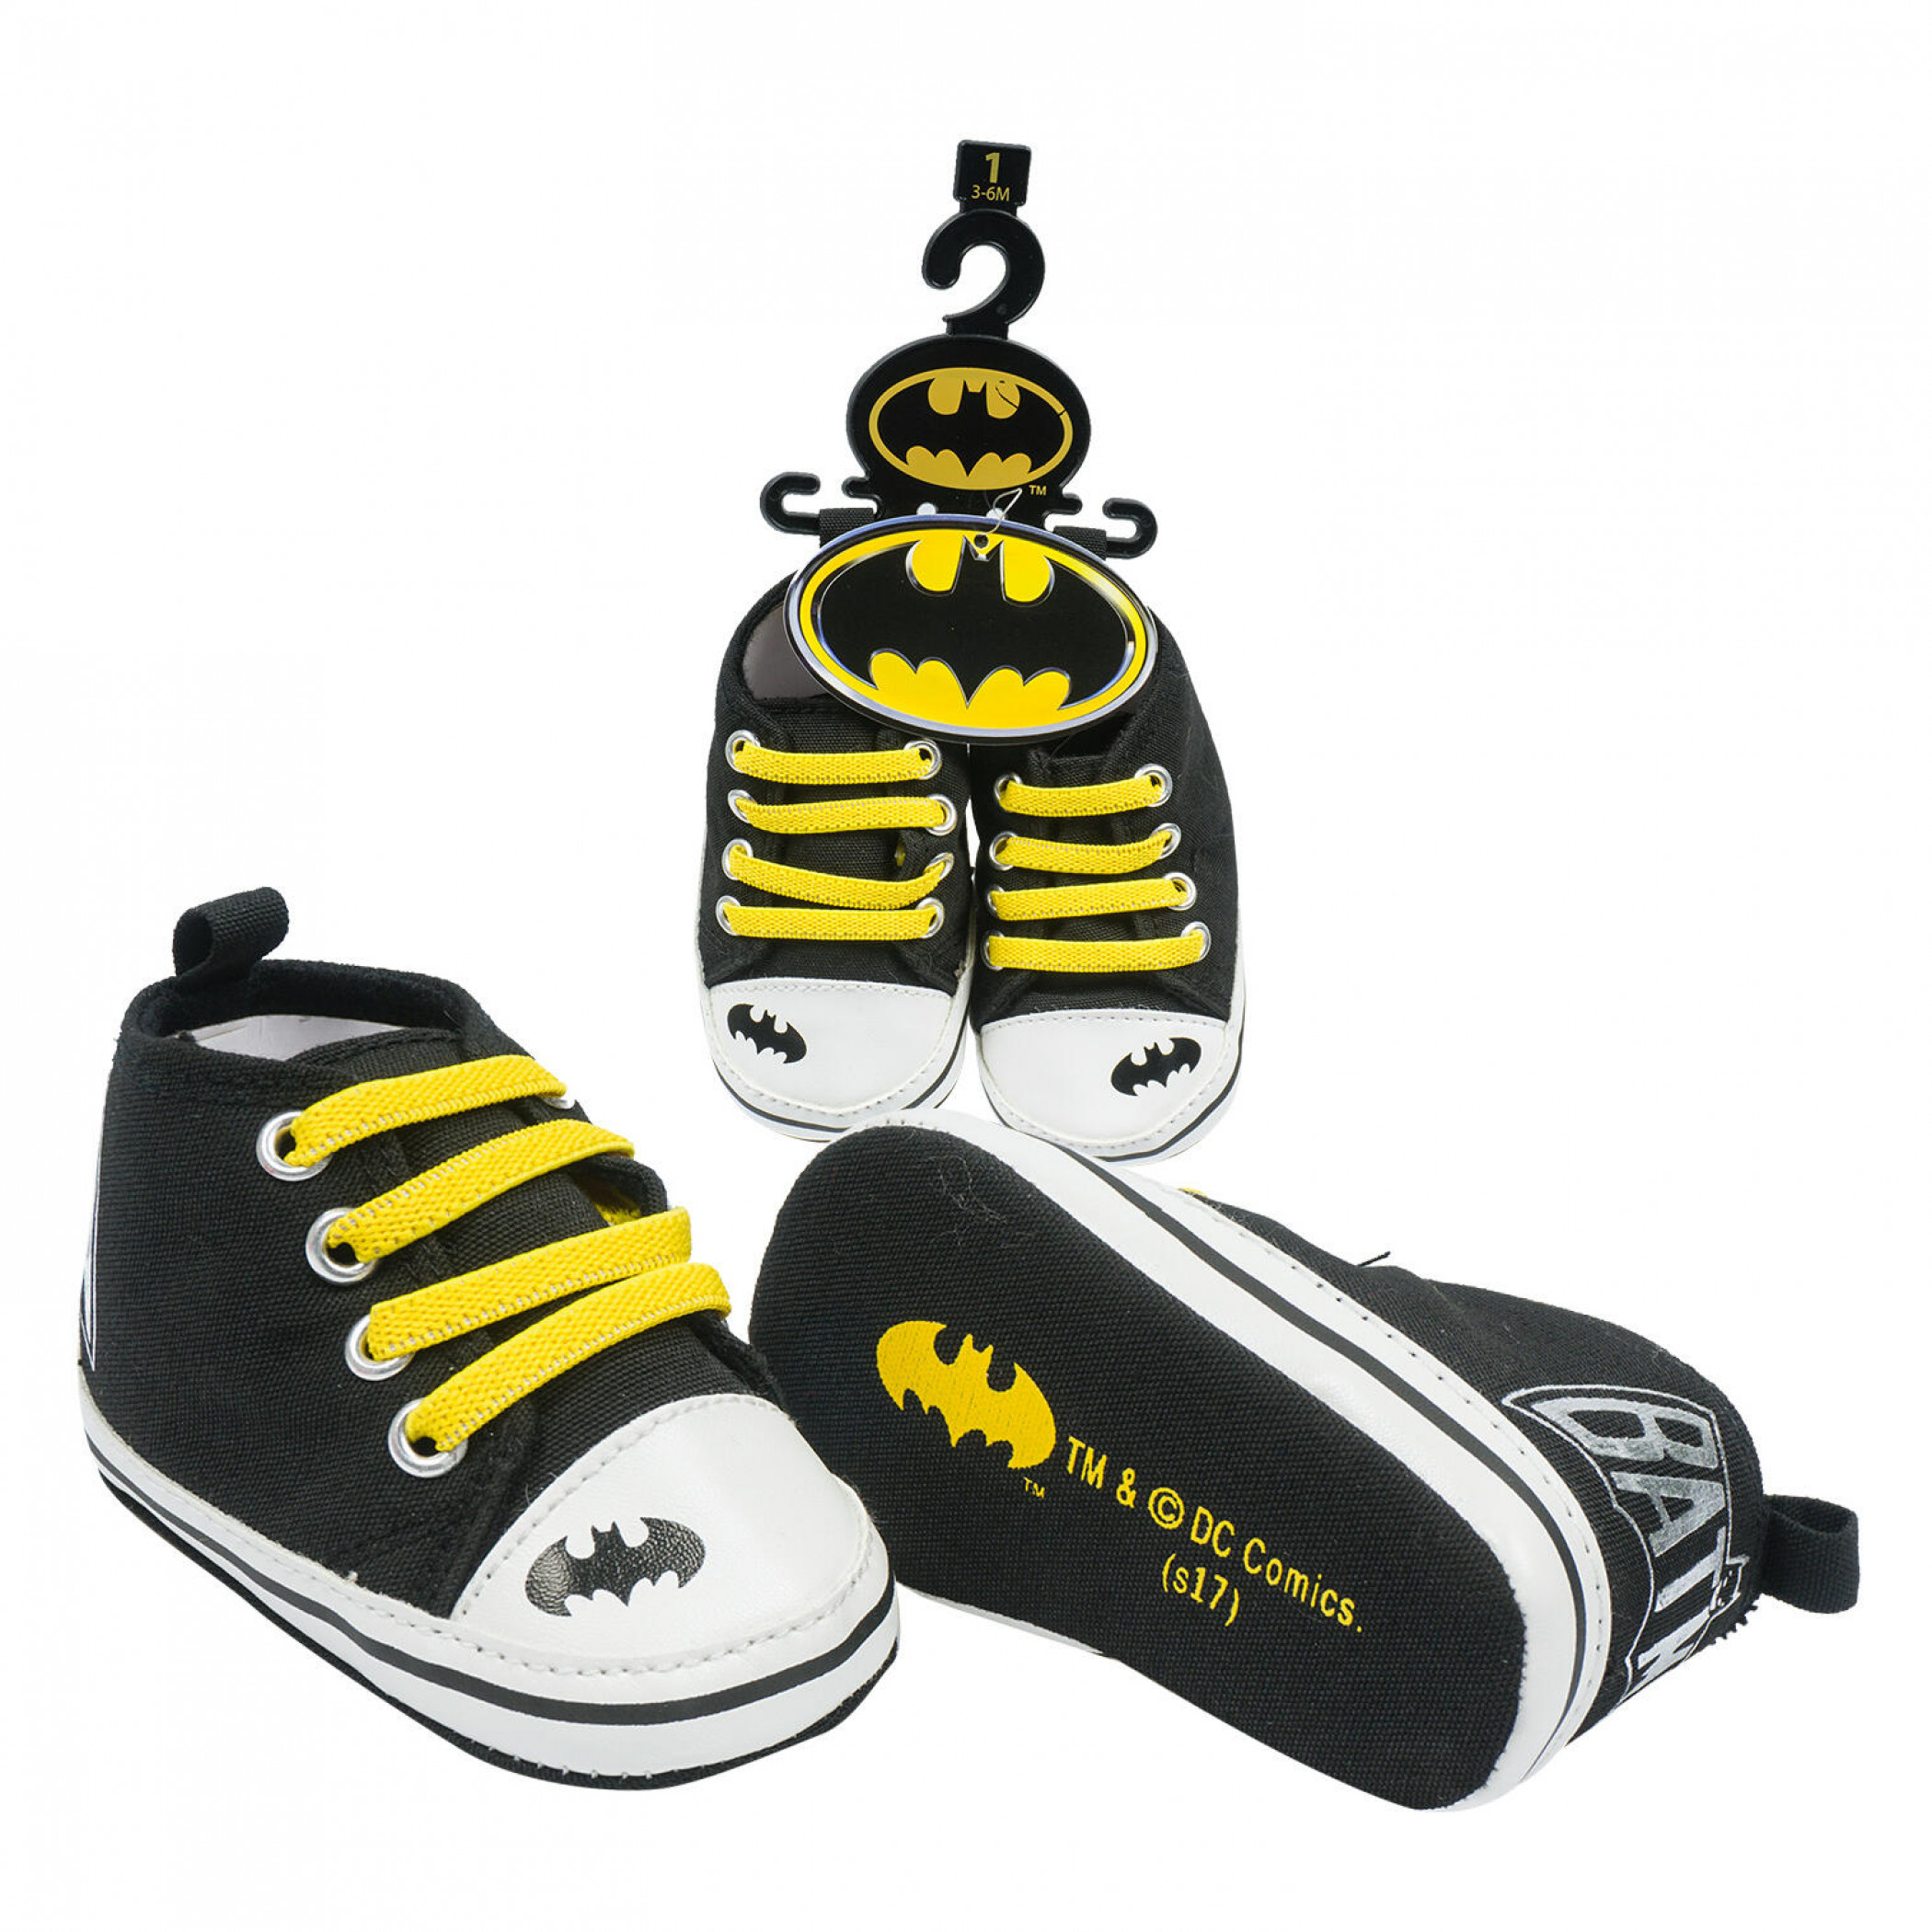 Batman Symbol and Text Baby Shoes